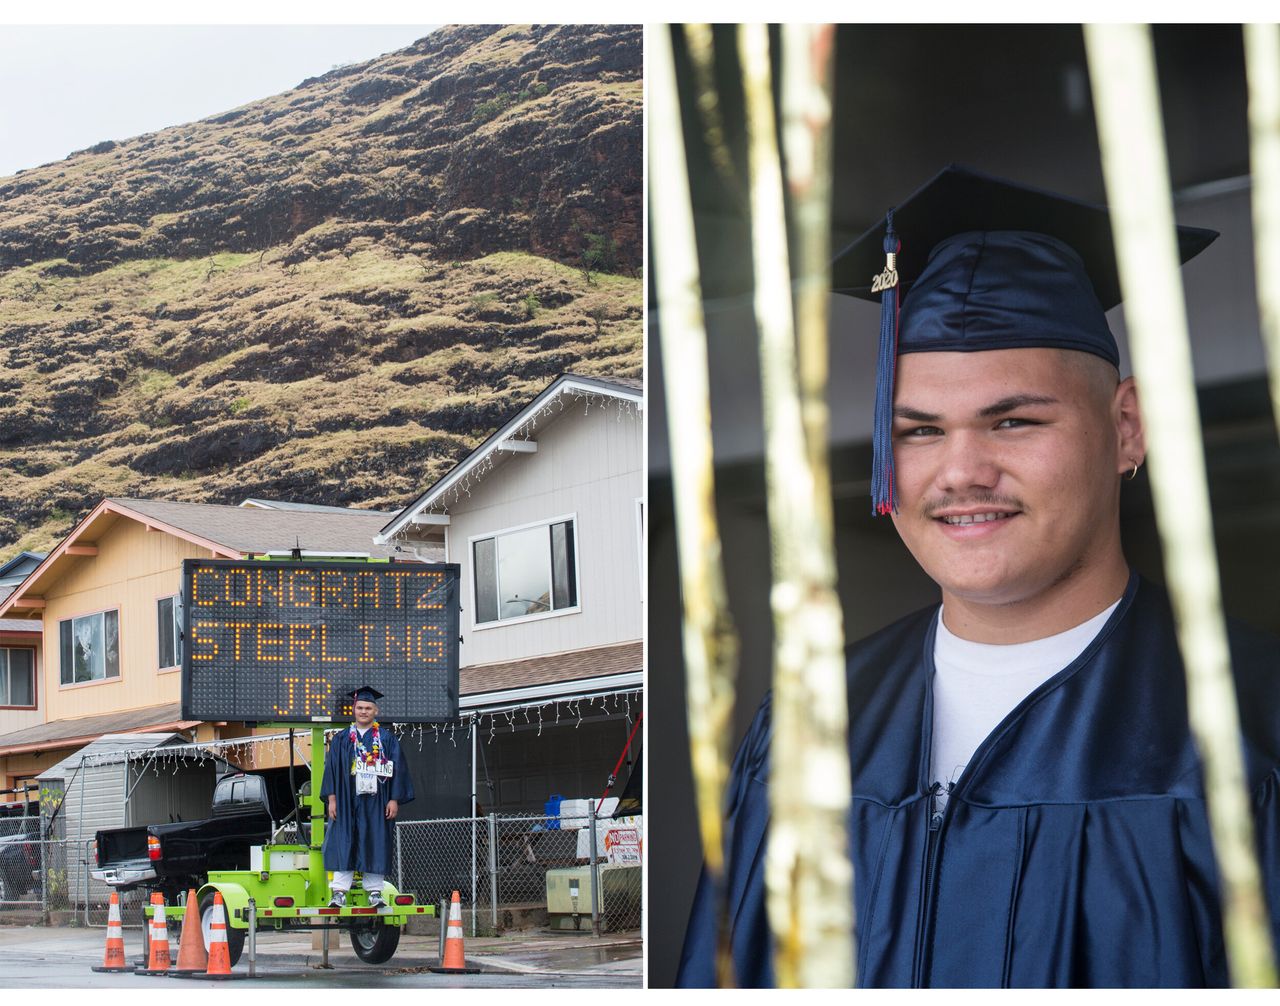 Sterling Hauki Williams Jr., a Waiʻanae High School graduate, stands atop a customized electronic road sign at his home in Waiʻanae, Hawaii, on May 23.